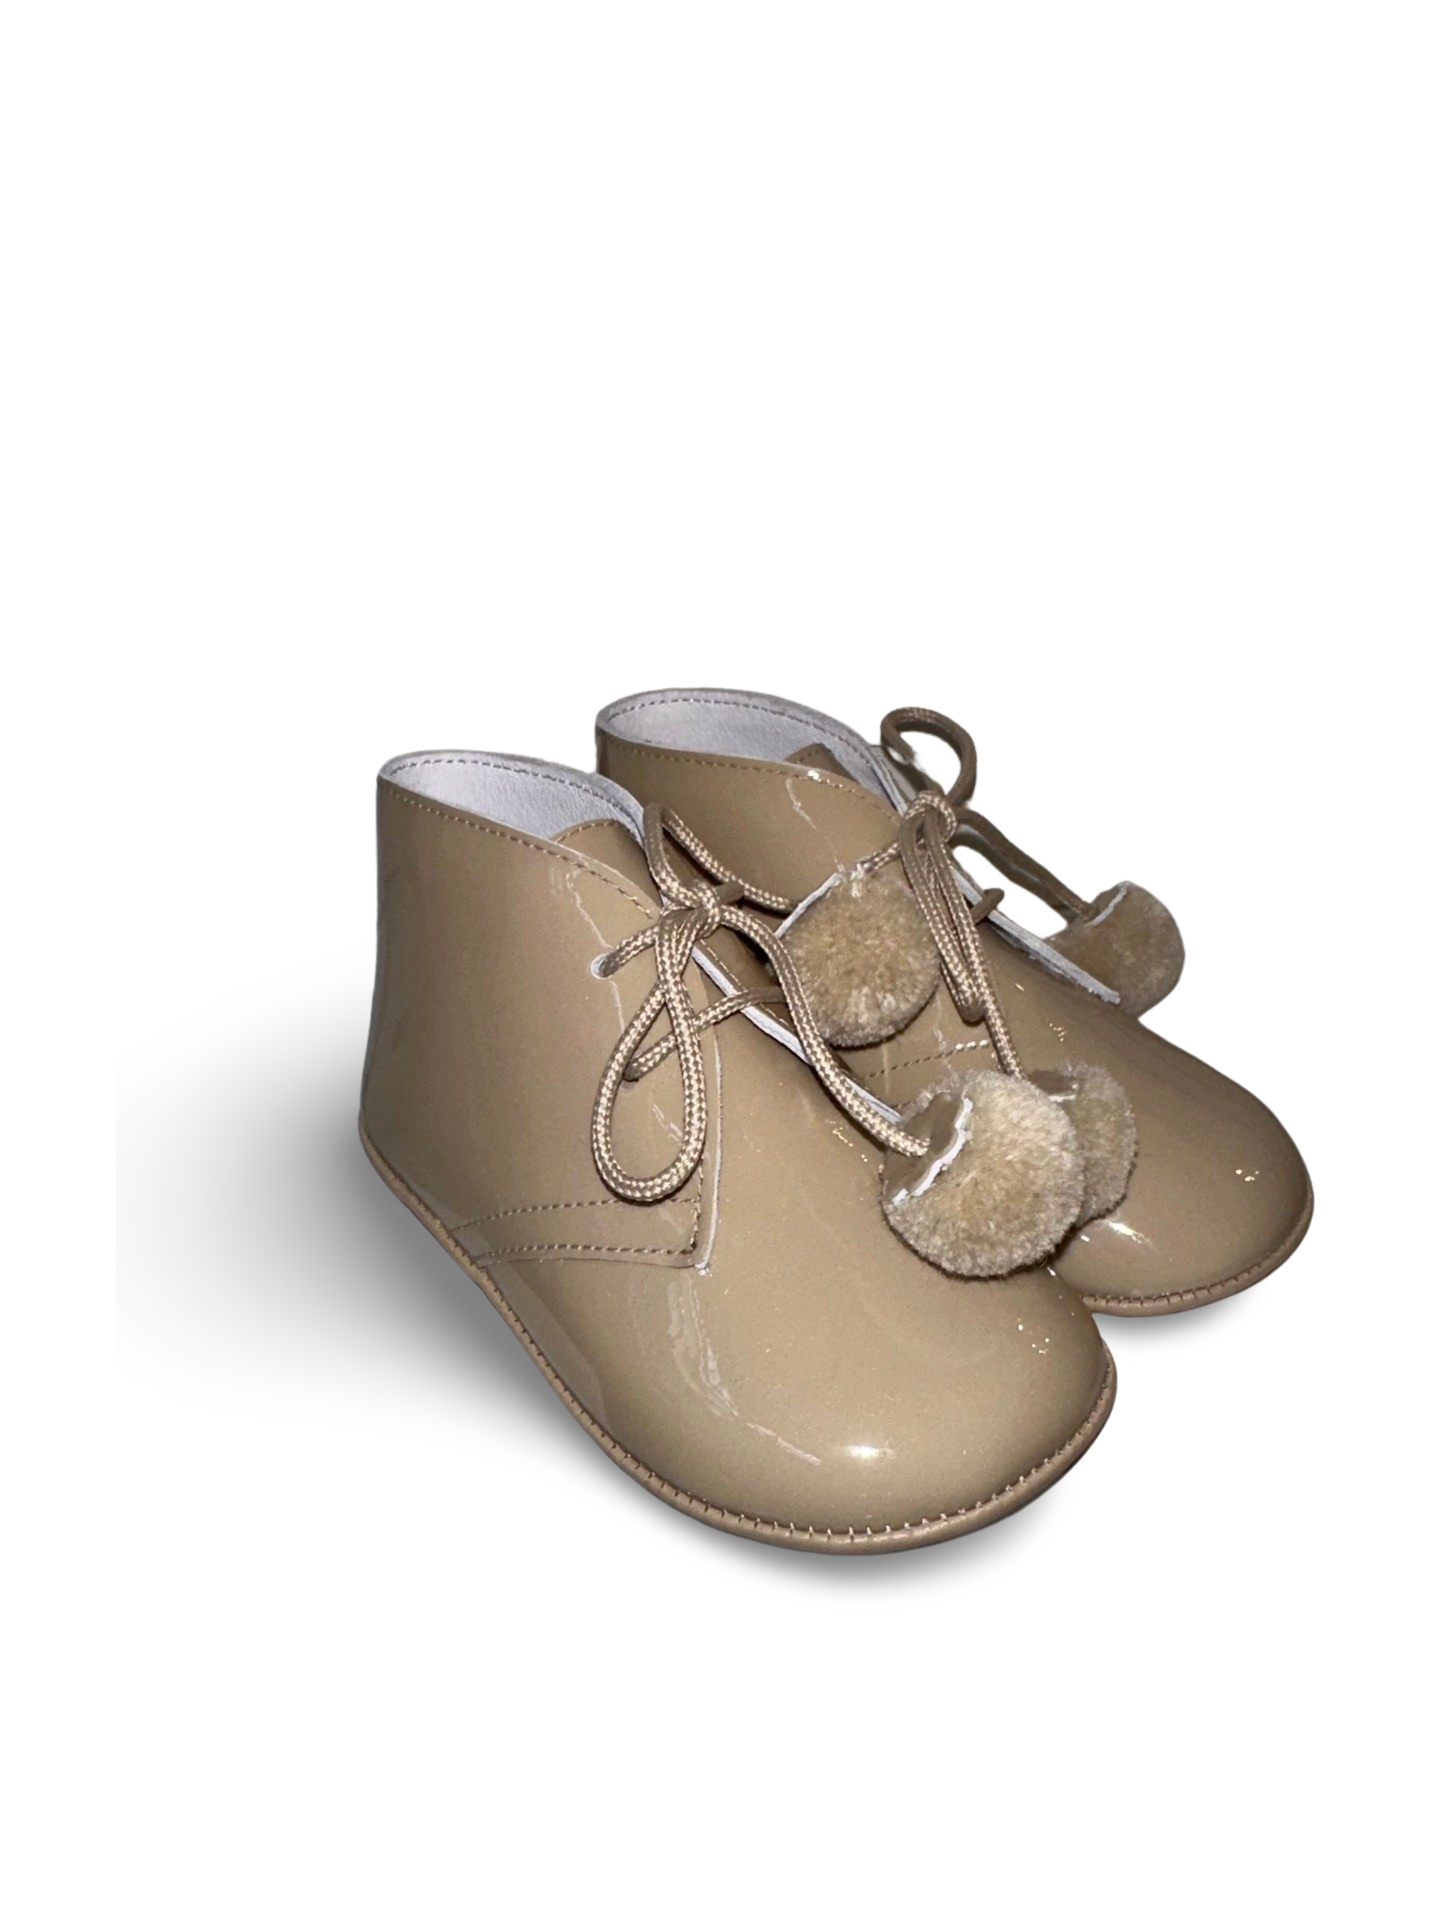 Andanines Soft Sole Booties Camel